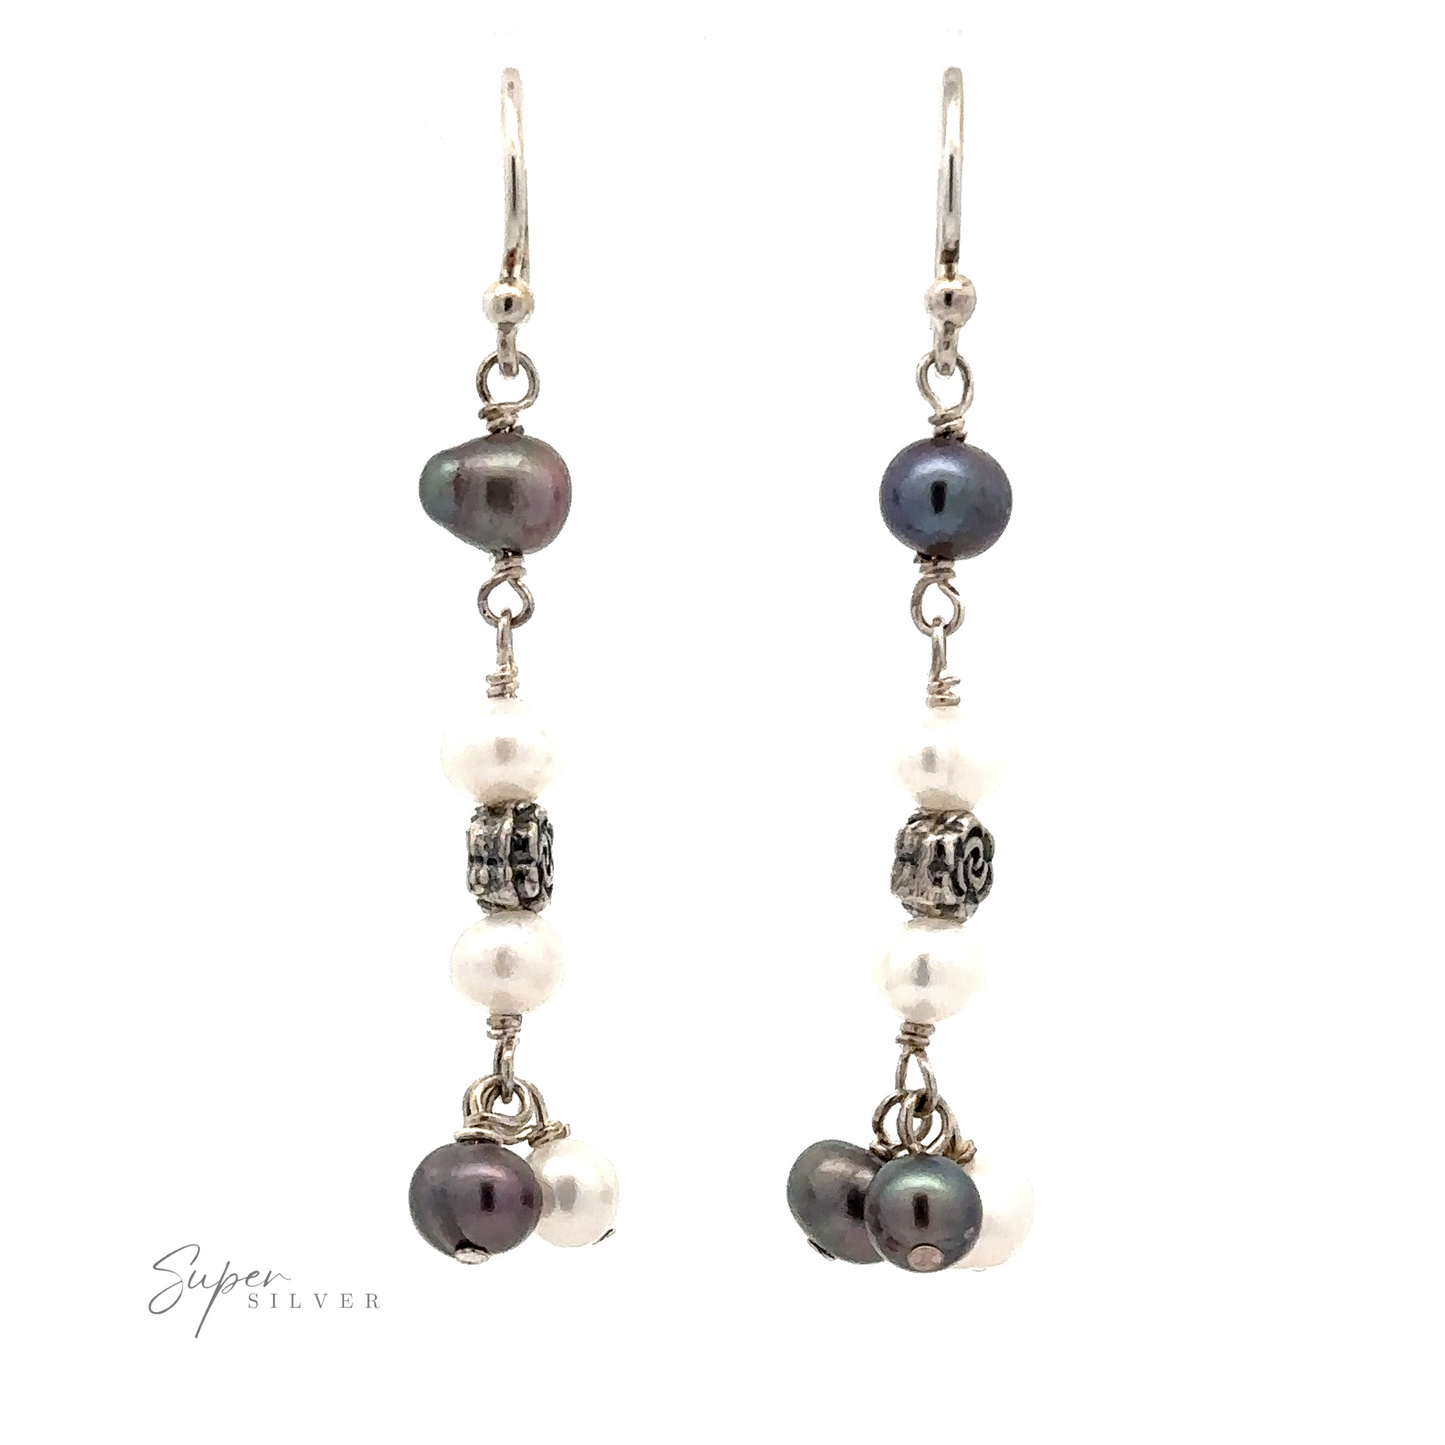 
                  
                    A pair of Floral Pearl Bead Earrings featuring black and white pearls with small silver accents, displayed against a white background.
                  
                